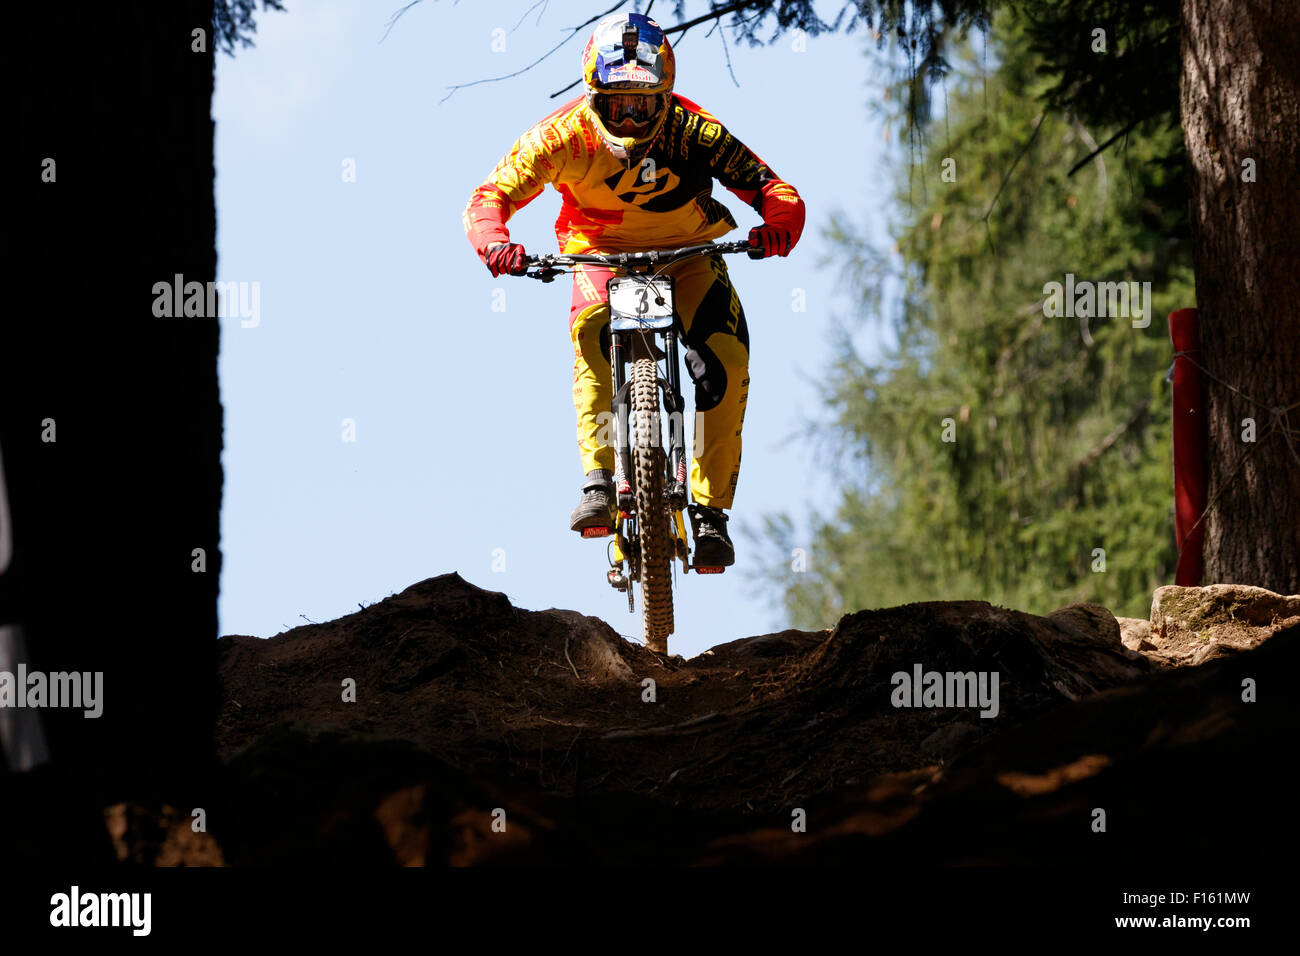 Val Di Sole, Italy - 22 August 2015: Lapierre Gravity Republic Team rider Bruni Loic, in action during the mens elite Downhill Stock Photo